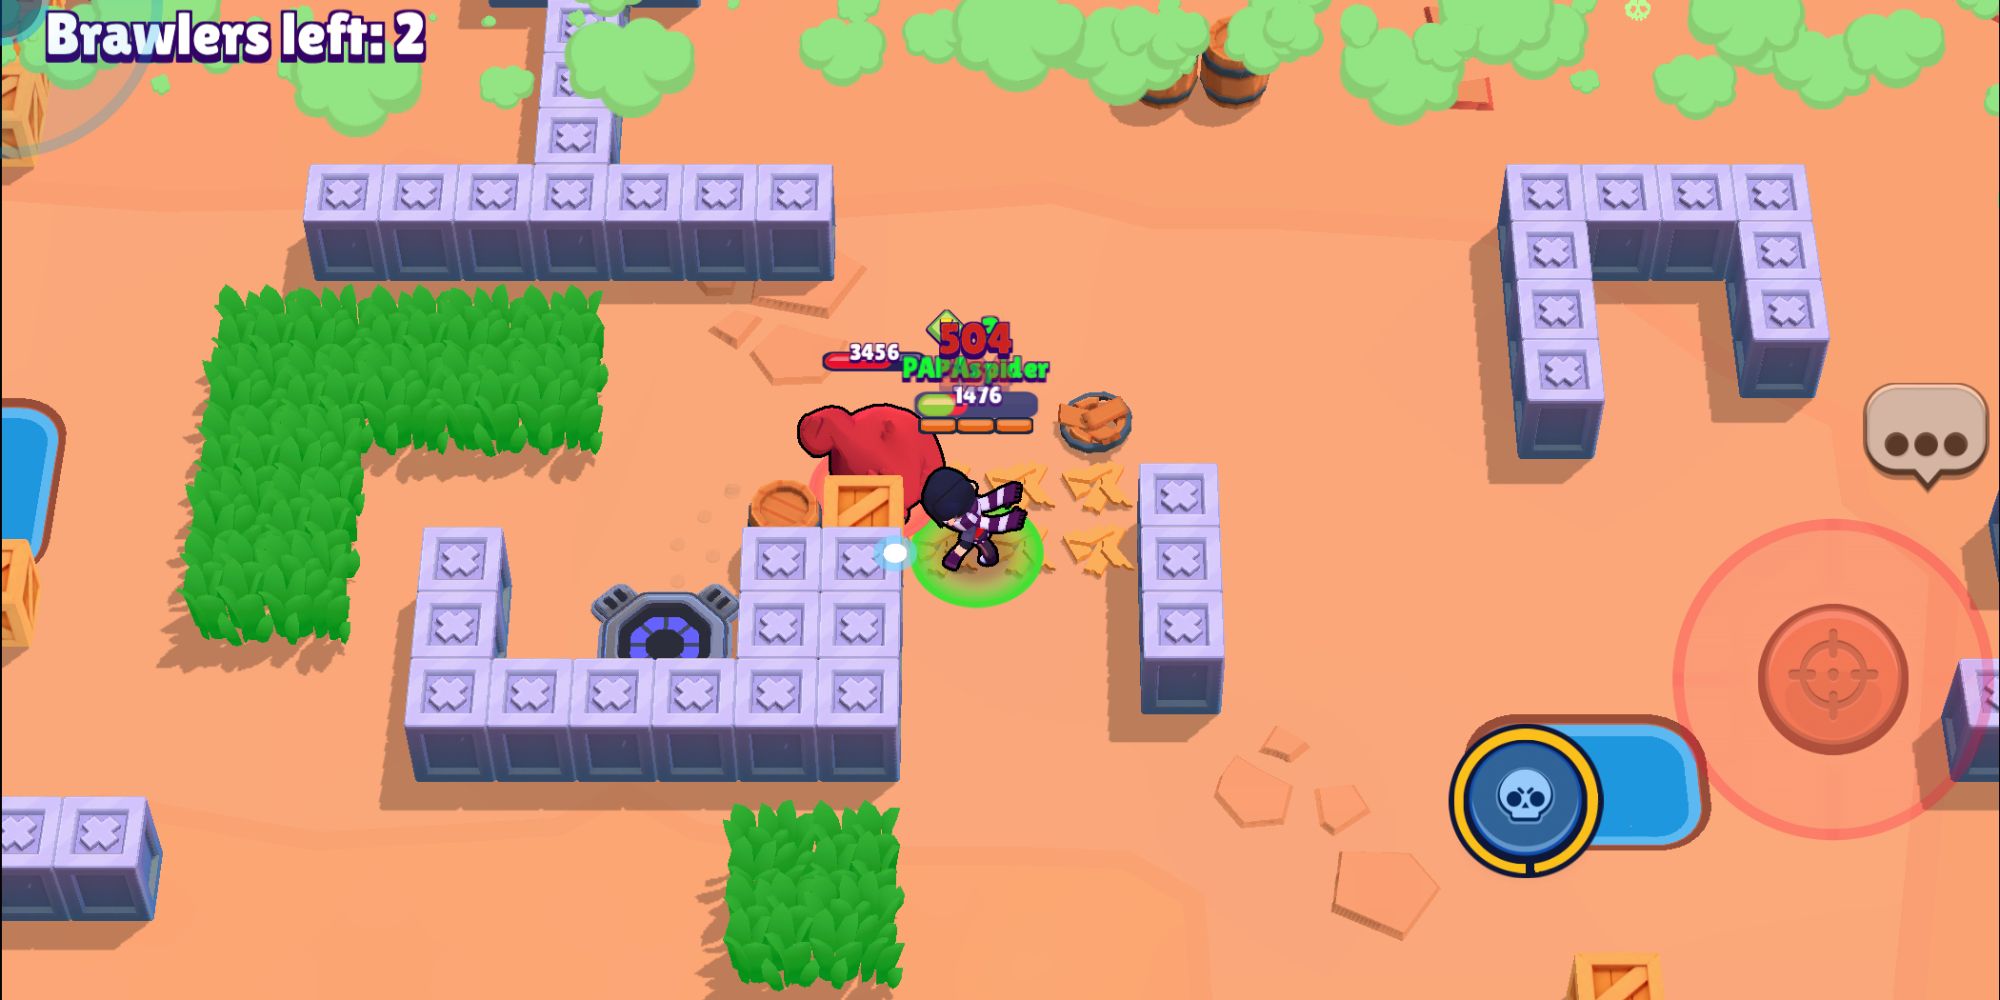 10 player Brawl Stars game in action